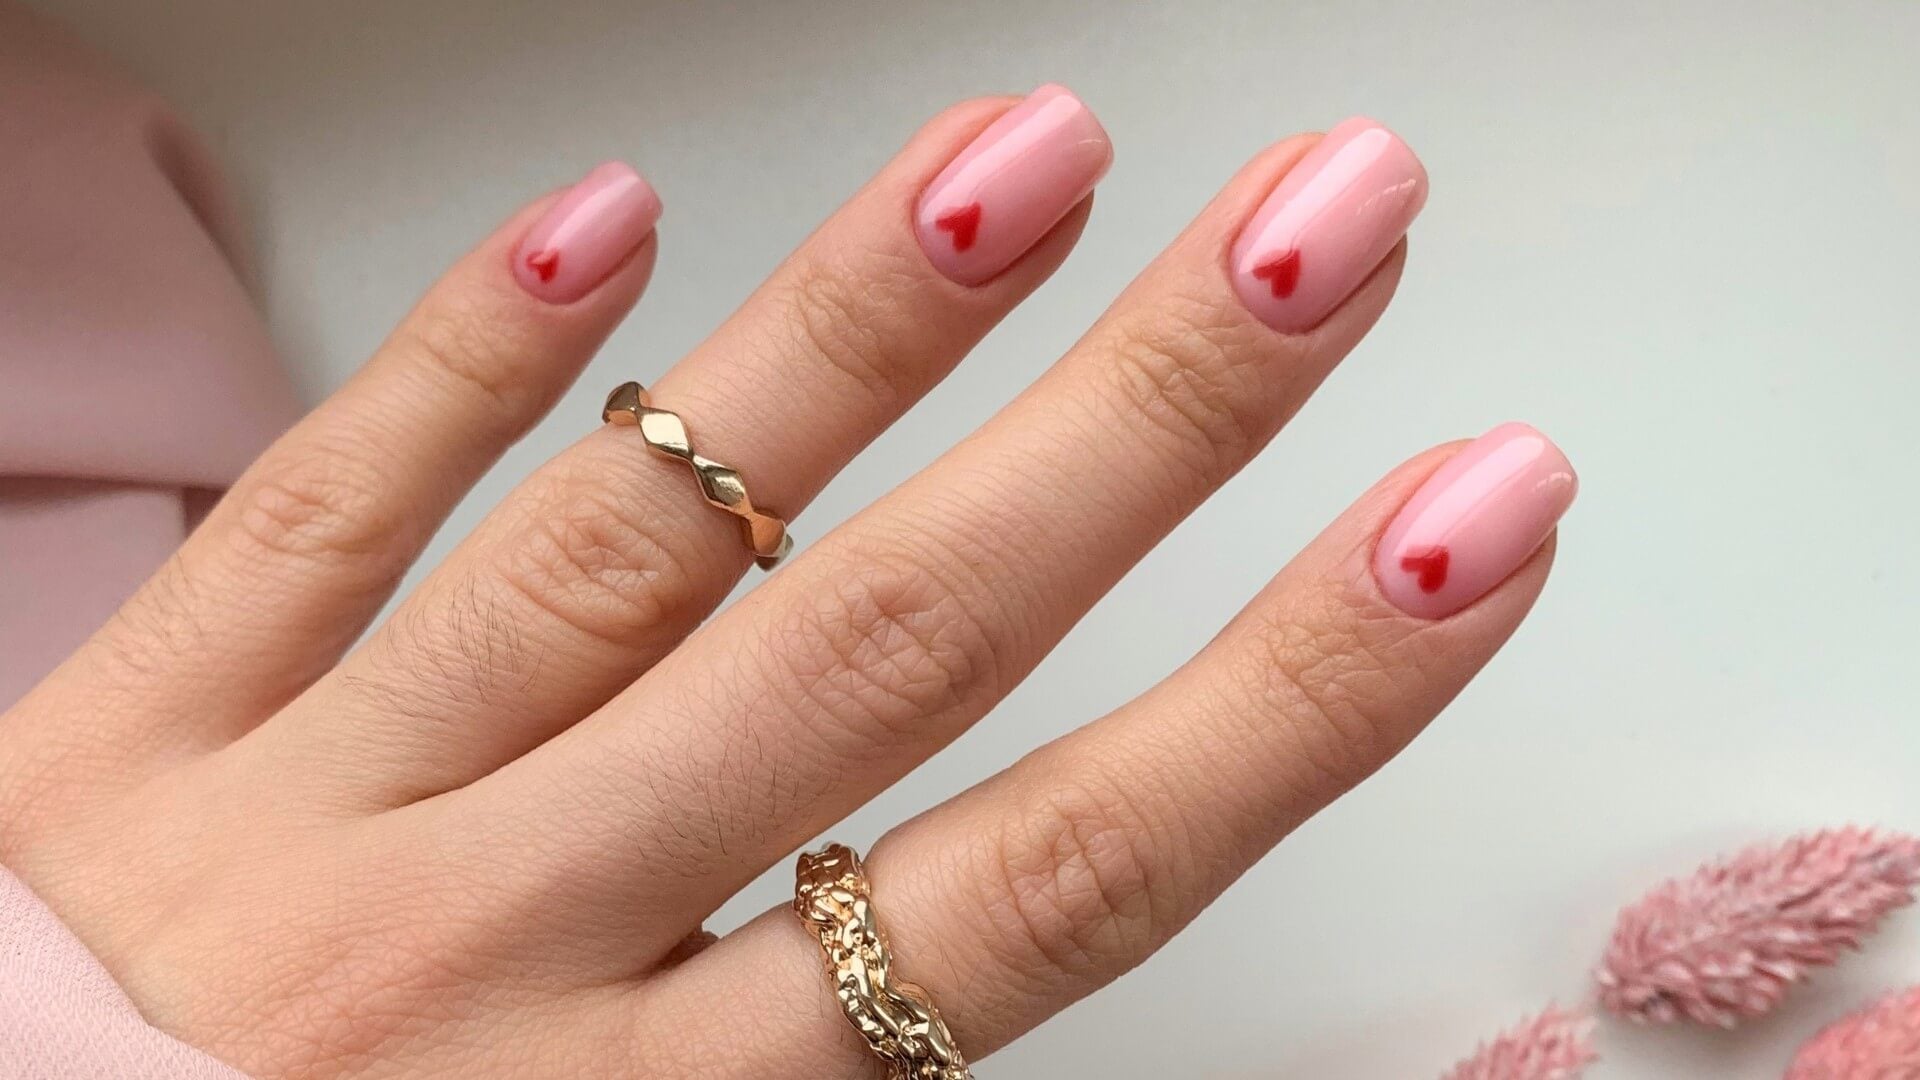 Born Pretty Red Jelly Transparent Nail Gel 7ml Pink Nude Color Soak Off Gel  Nail Polish For Manicure Design At Home Salon Diy - Nail Gel - AliExpress